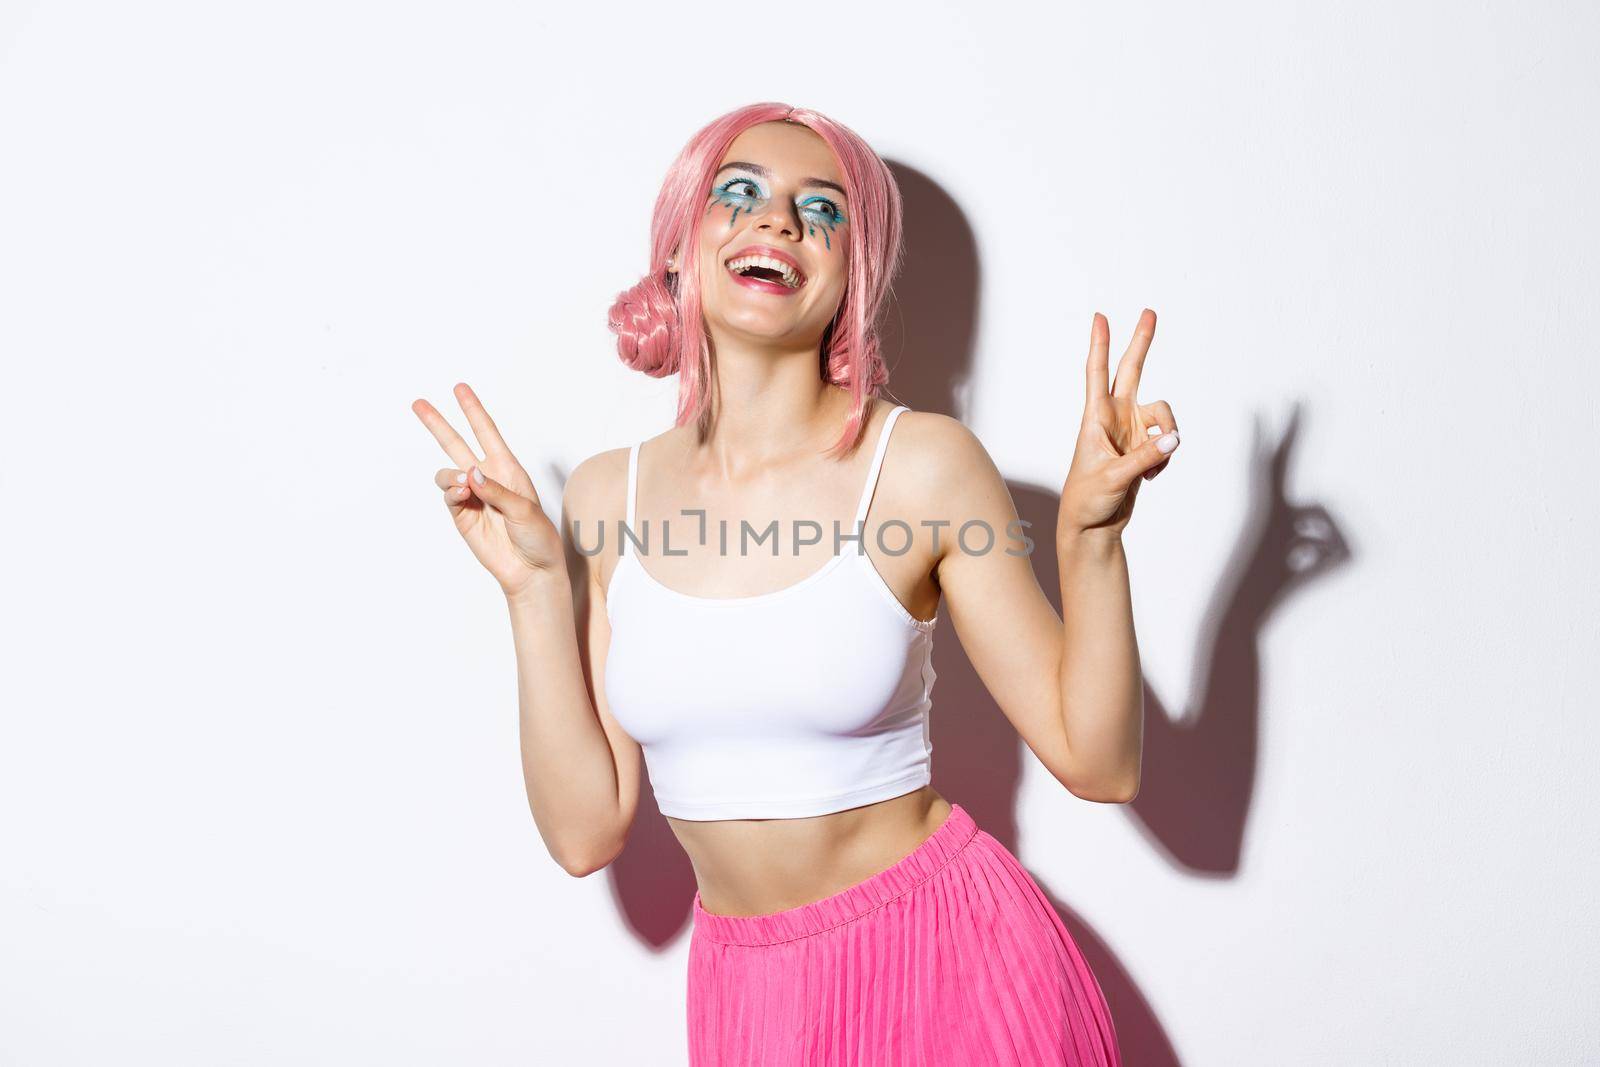 Portrait of beautiful smiling girl in pink wig, showing kawaii peace signs and laughing, wearing outfit for party, standing over white background.